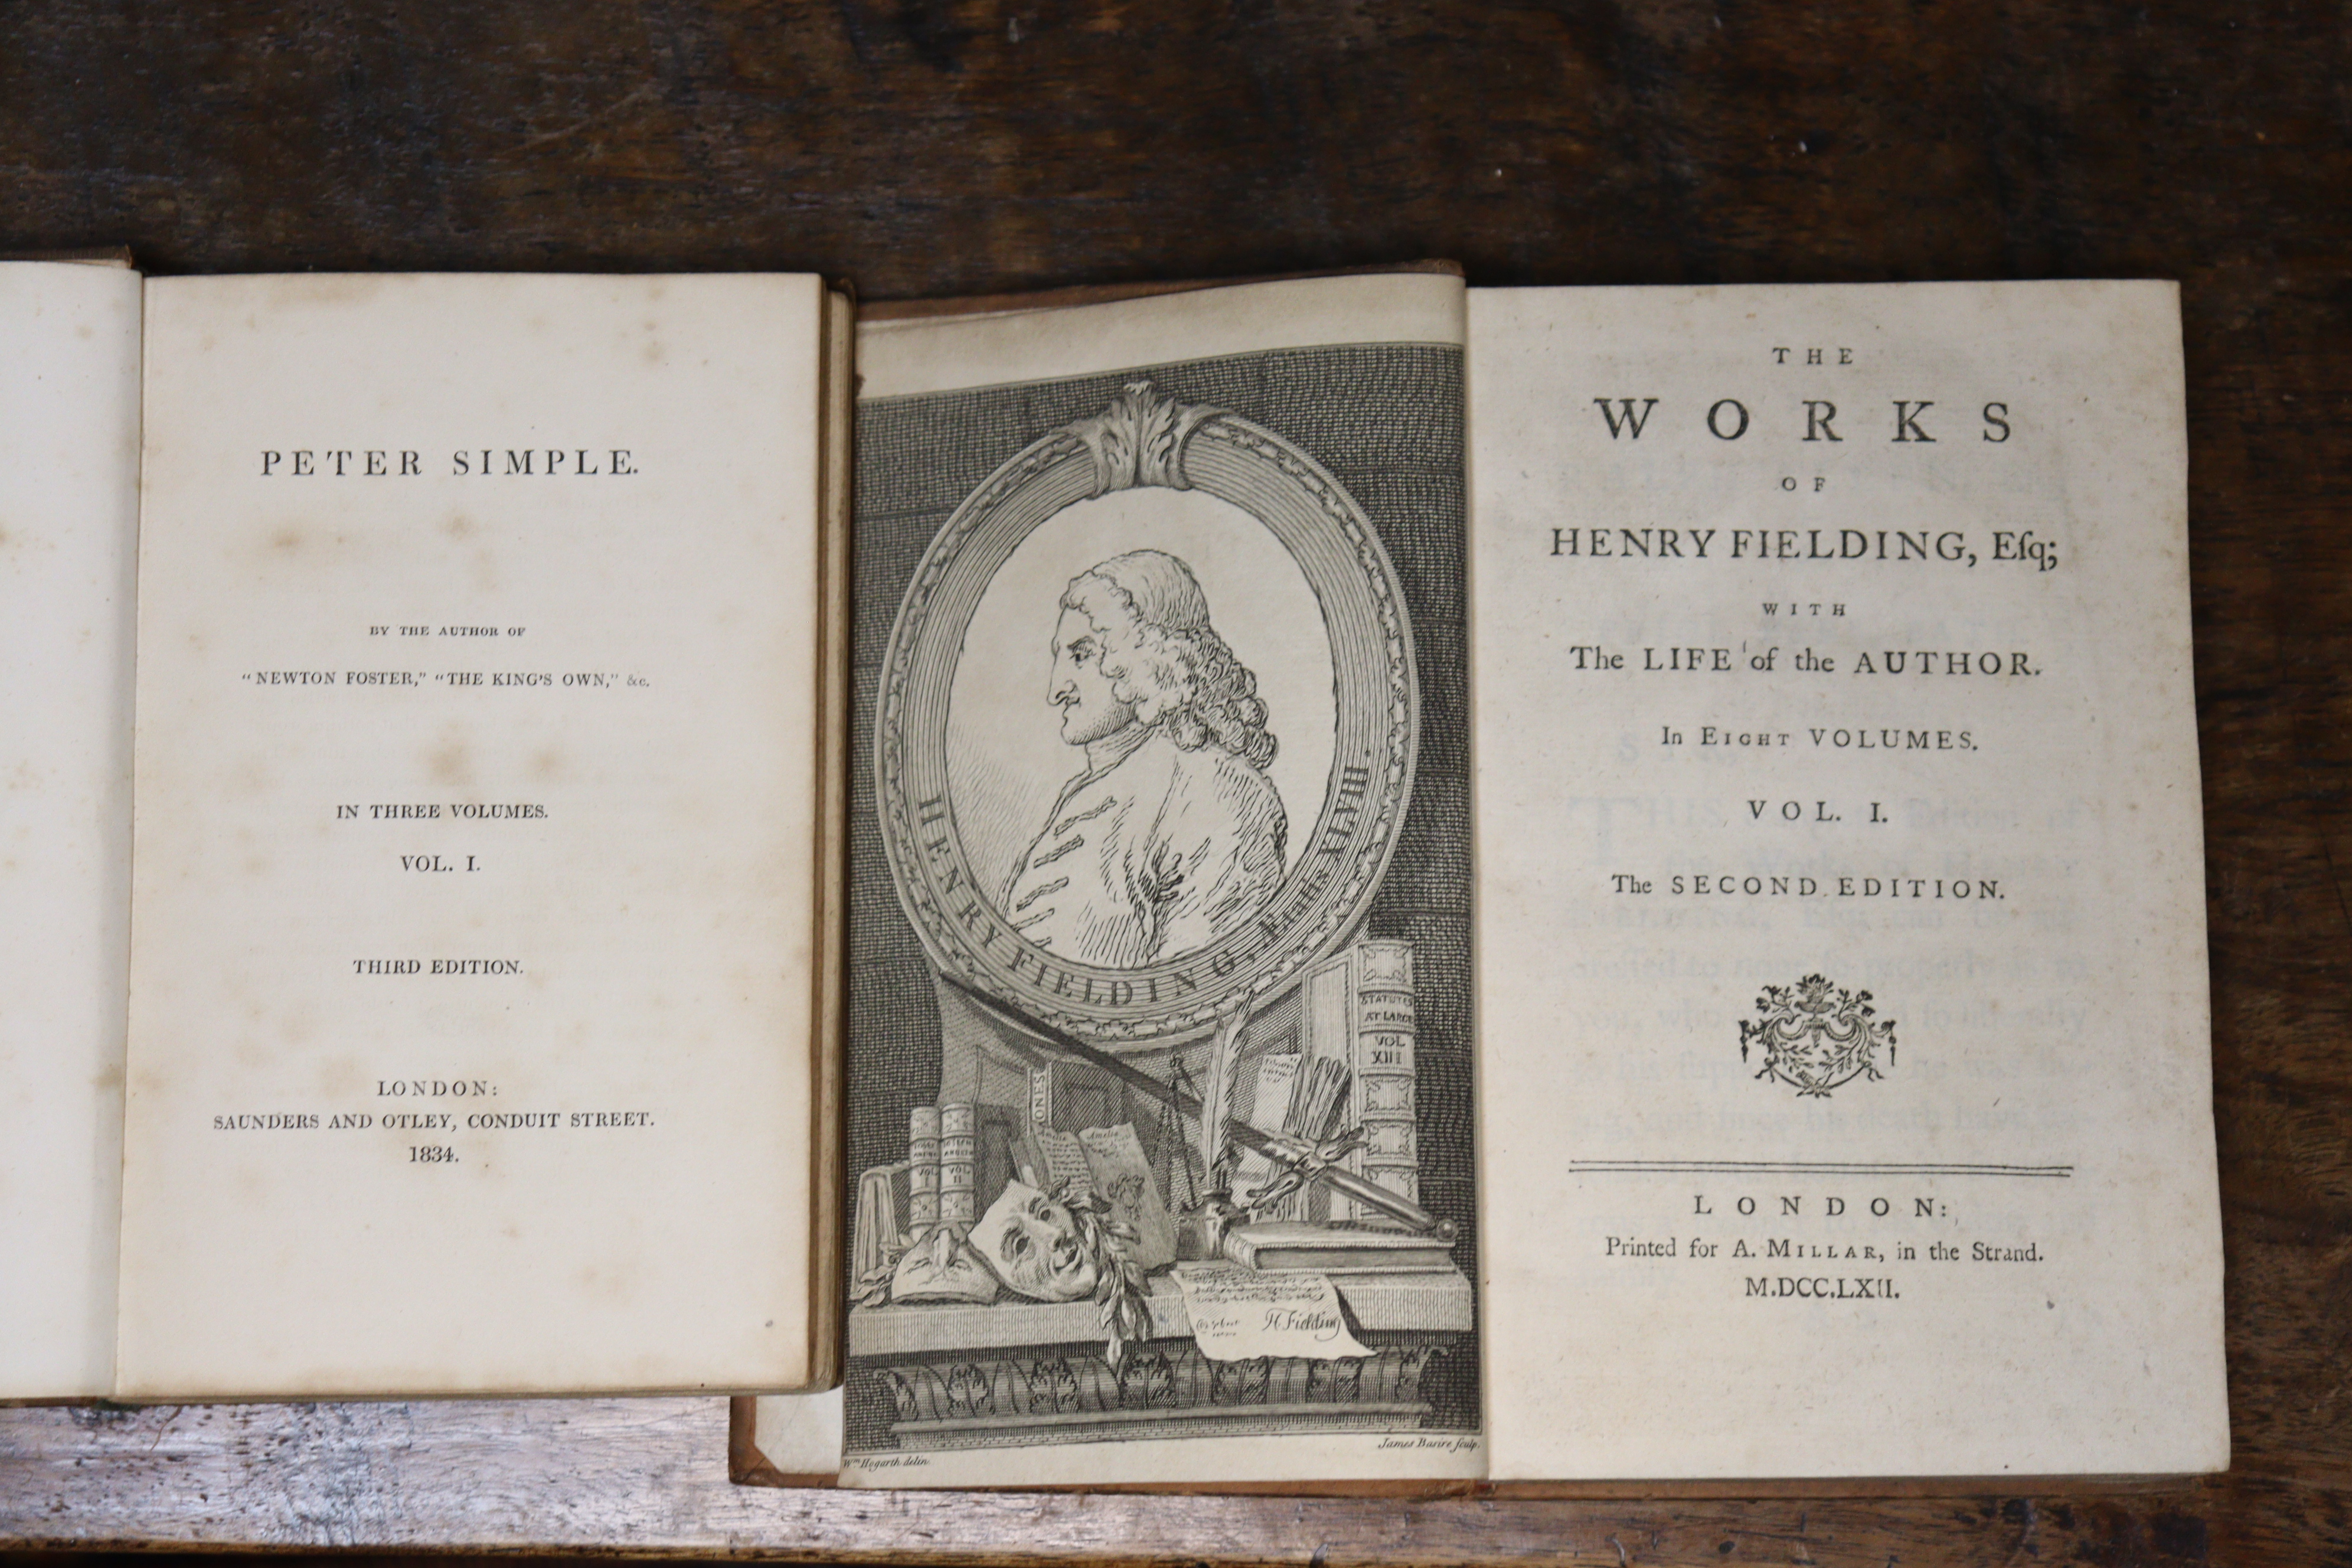 The Works of Henry Fielding, Esq., vols I, II, III & V (of 8), Published 1757, London by A Millar, - Image 4 of 4